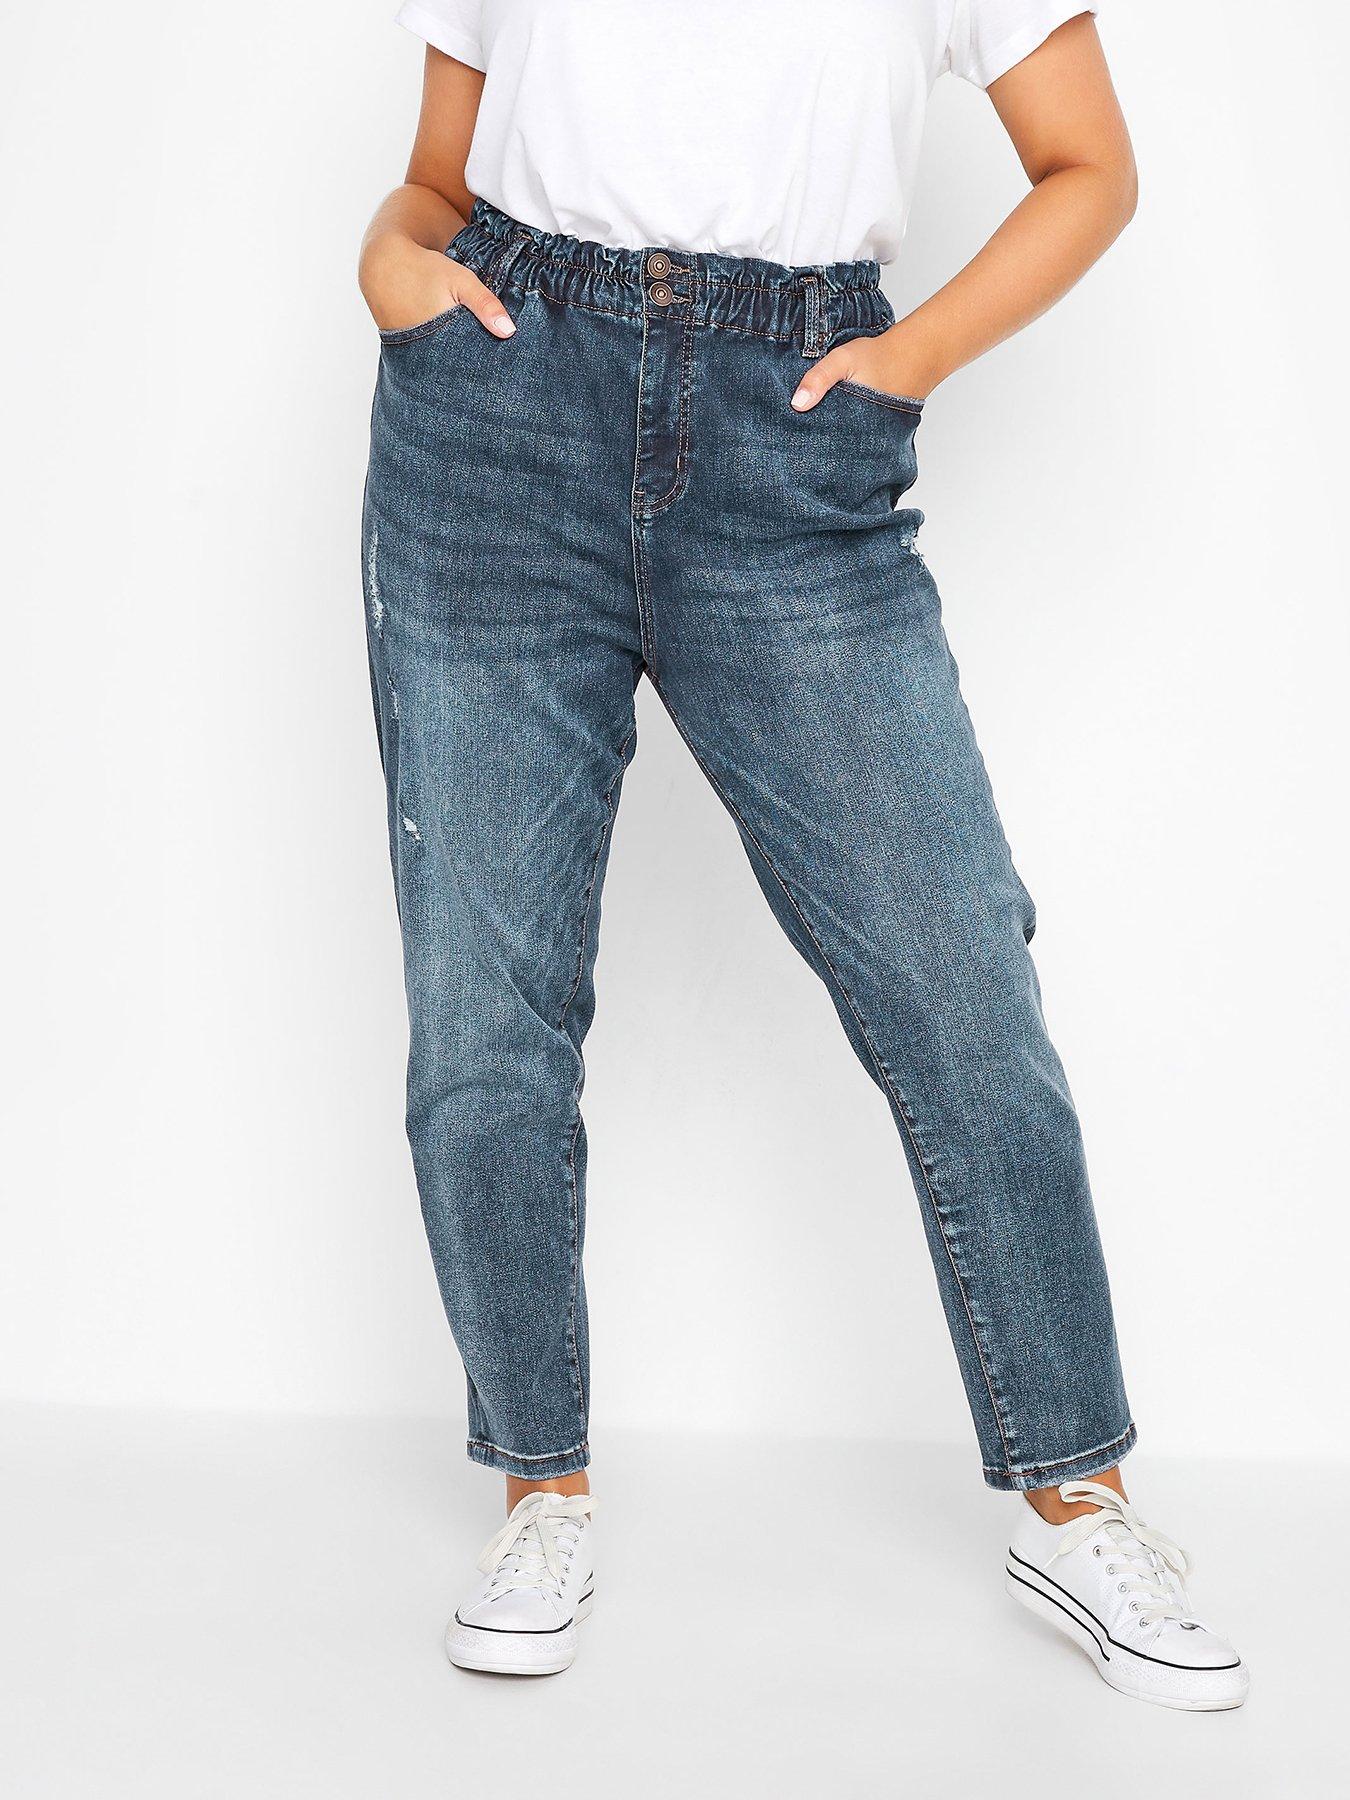 Plus Size Mom Jeans, Women's High Waisted Mom Jeans